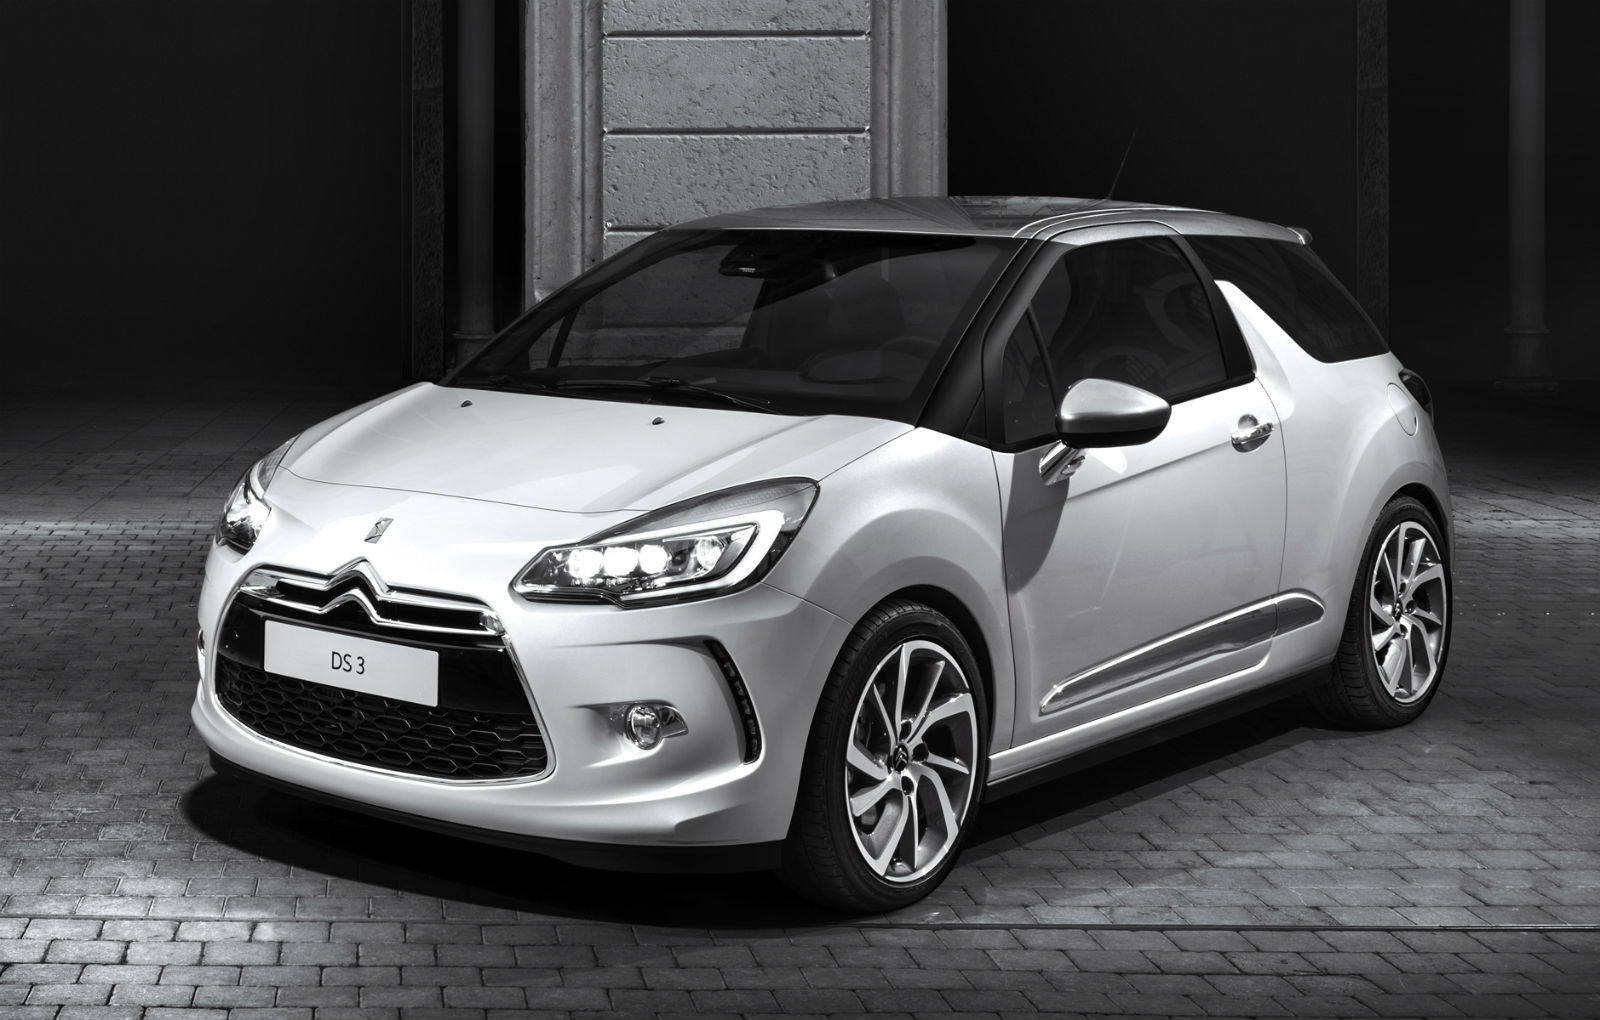 At Glenmarie, Showroom Citreon DS3 Facelift Previewed